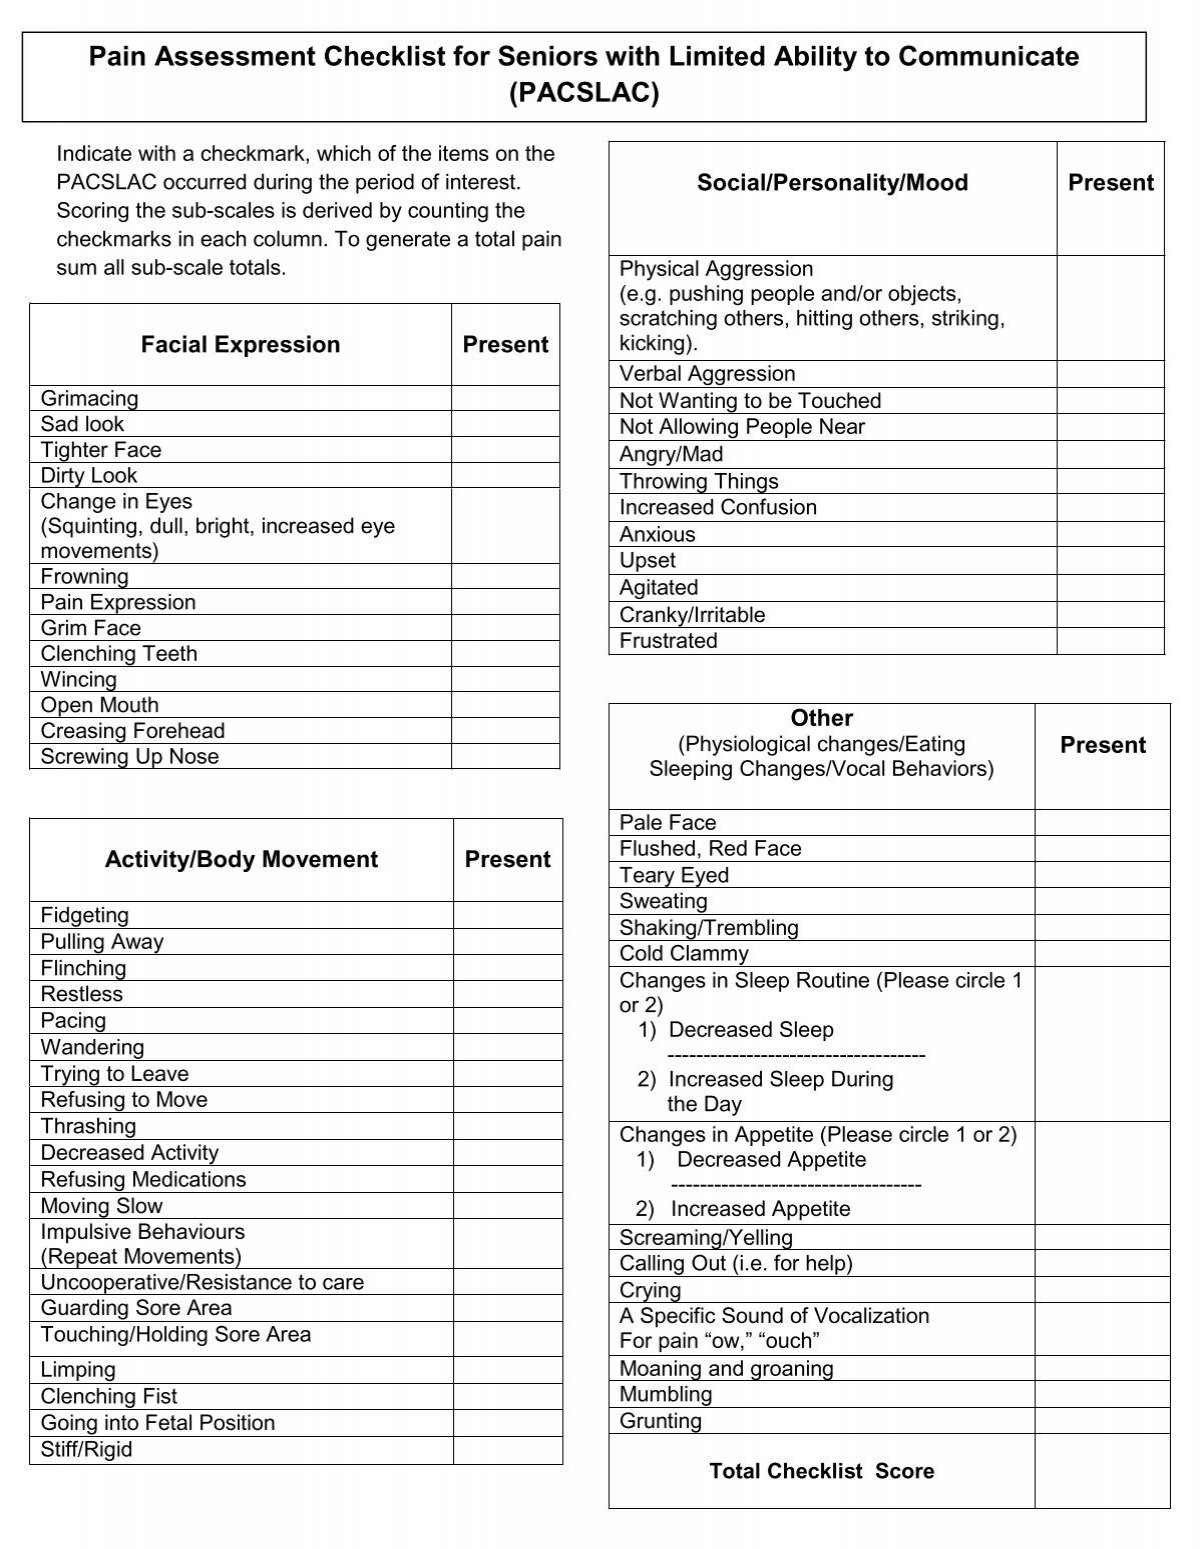 Pain Assessment Checklist for Seniors with Limited ... - Geriatric Pain